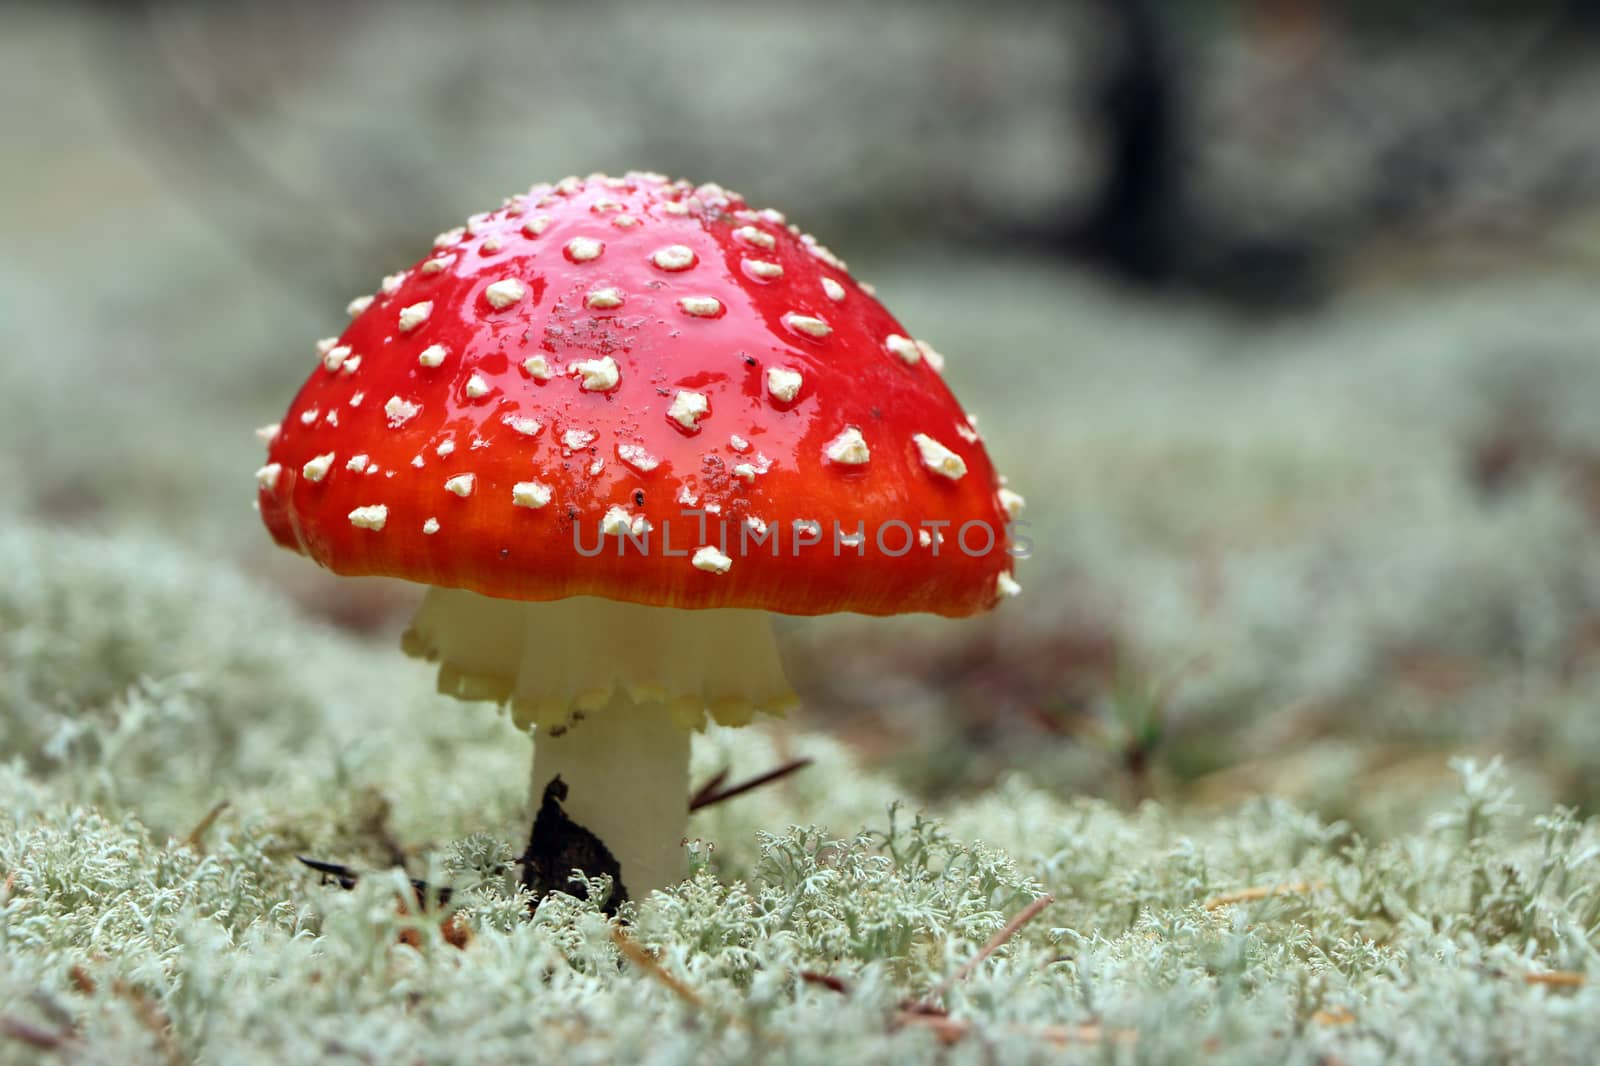 Red Agaric mushroom close-up in rain drop grow in wood. Beautiful inedible forest plant